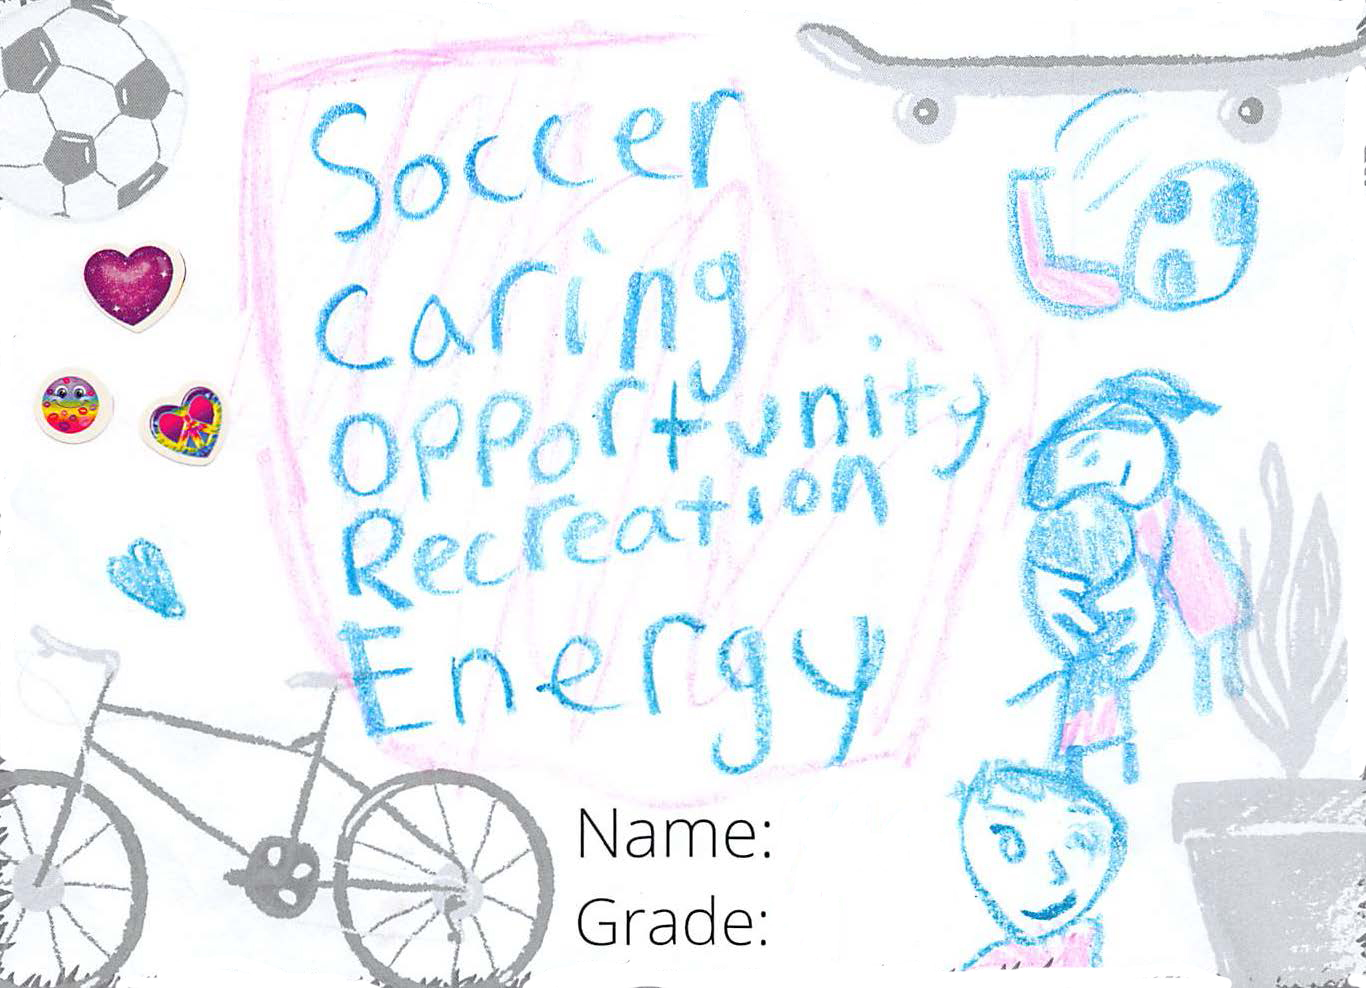 Pencil crayon drawing for the SCORE! logo contest. The drawing includes the following words: soccer, caring, opportunity, recreation, energy.